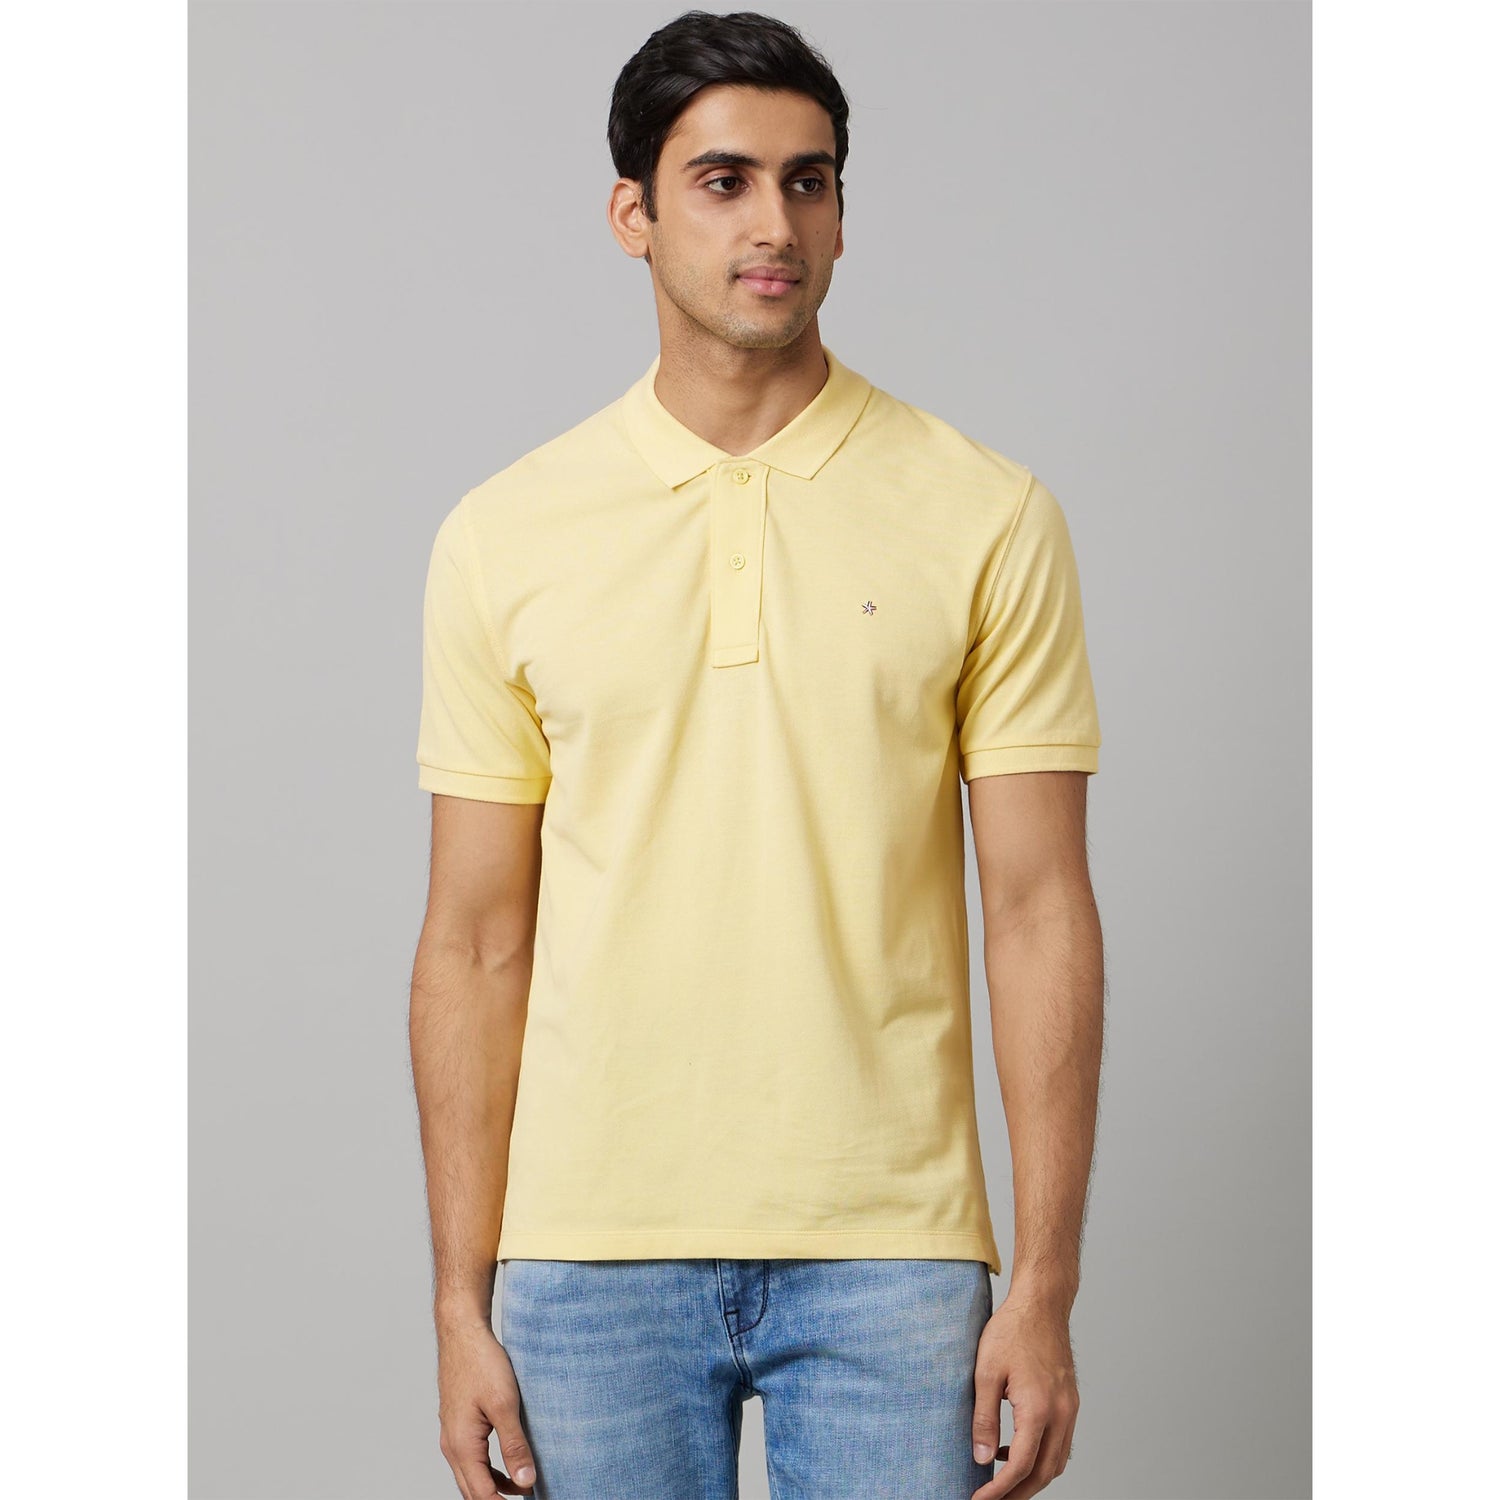 Yellow Polo Collar Breathable Cotton T-shirt (TEONEPL)